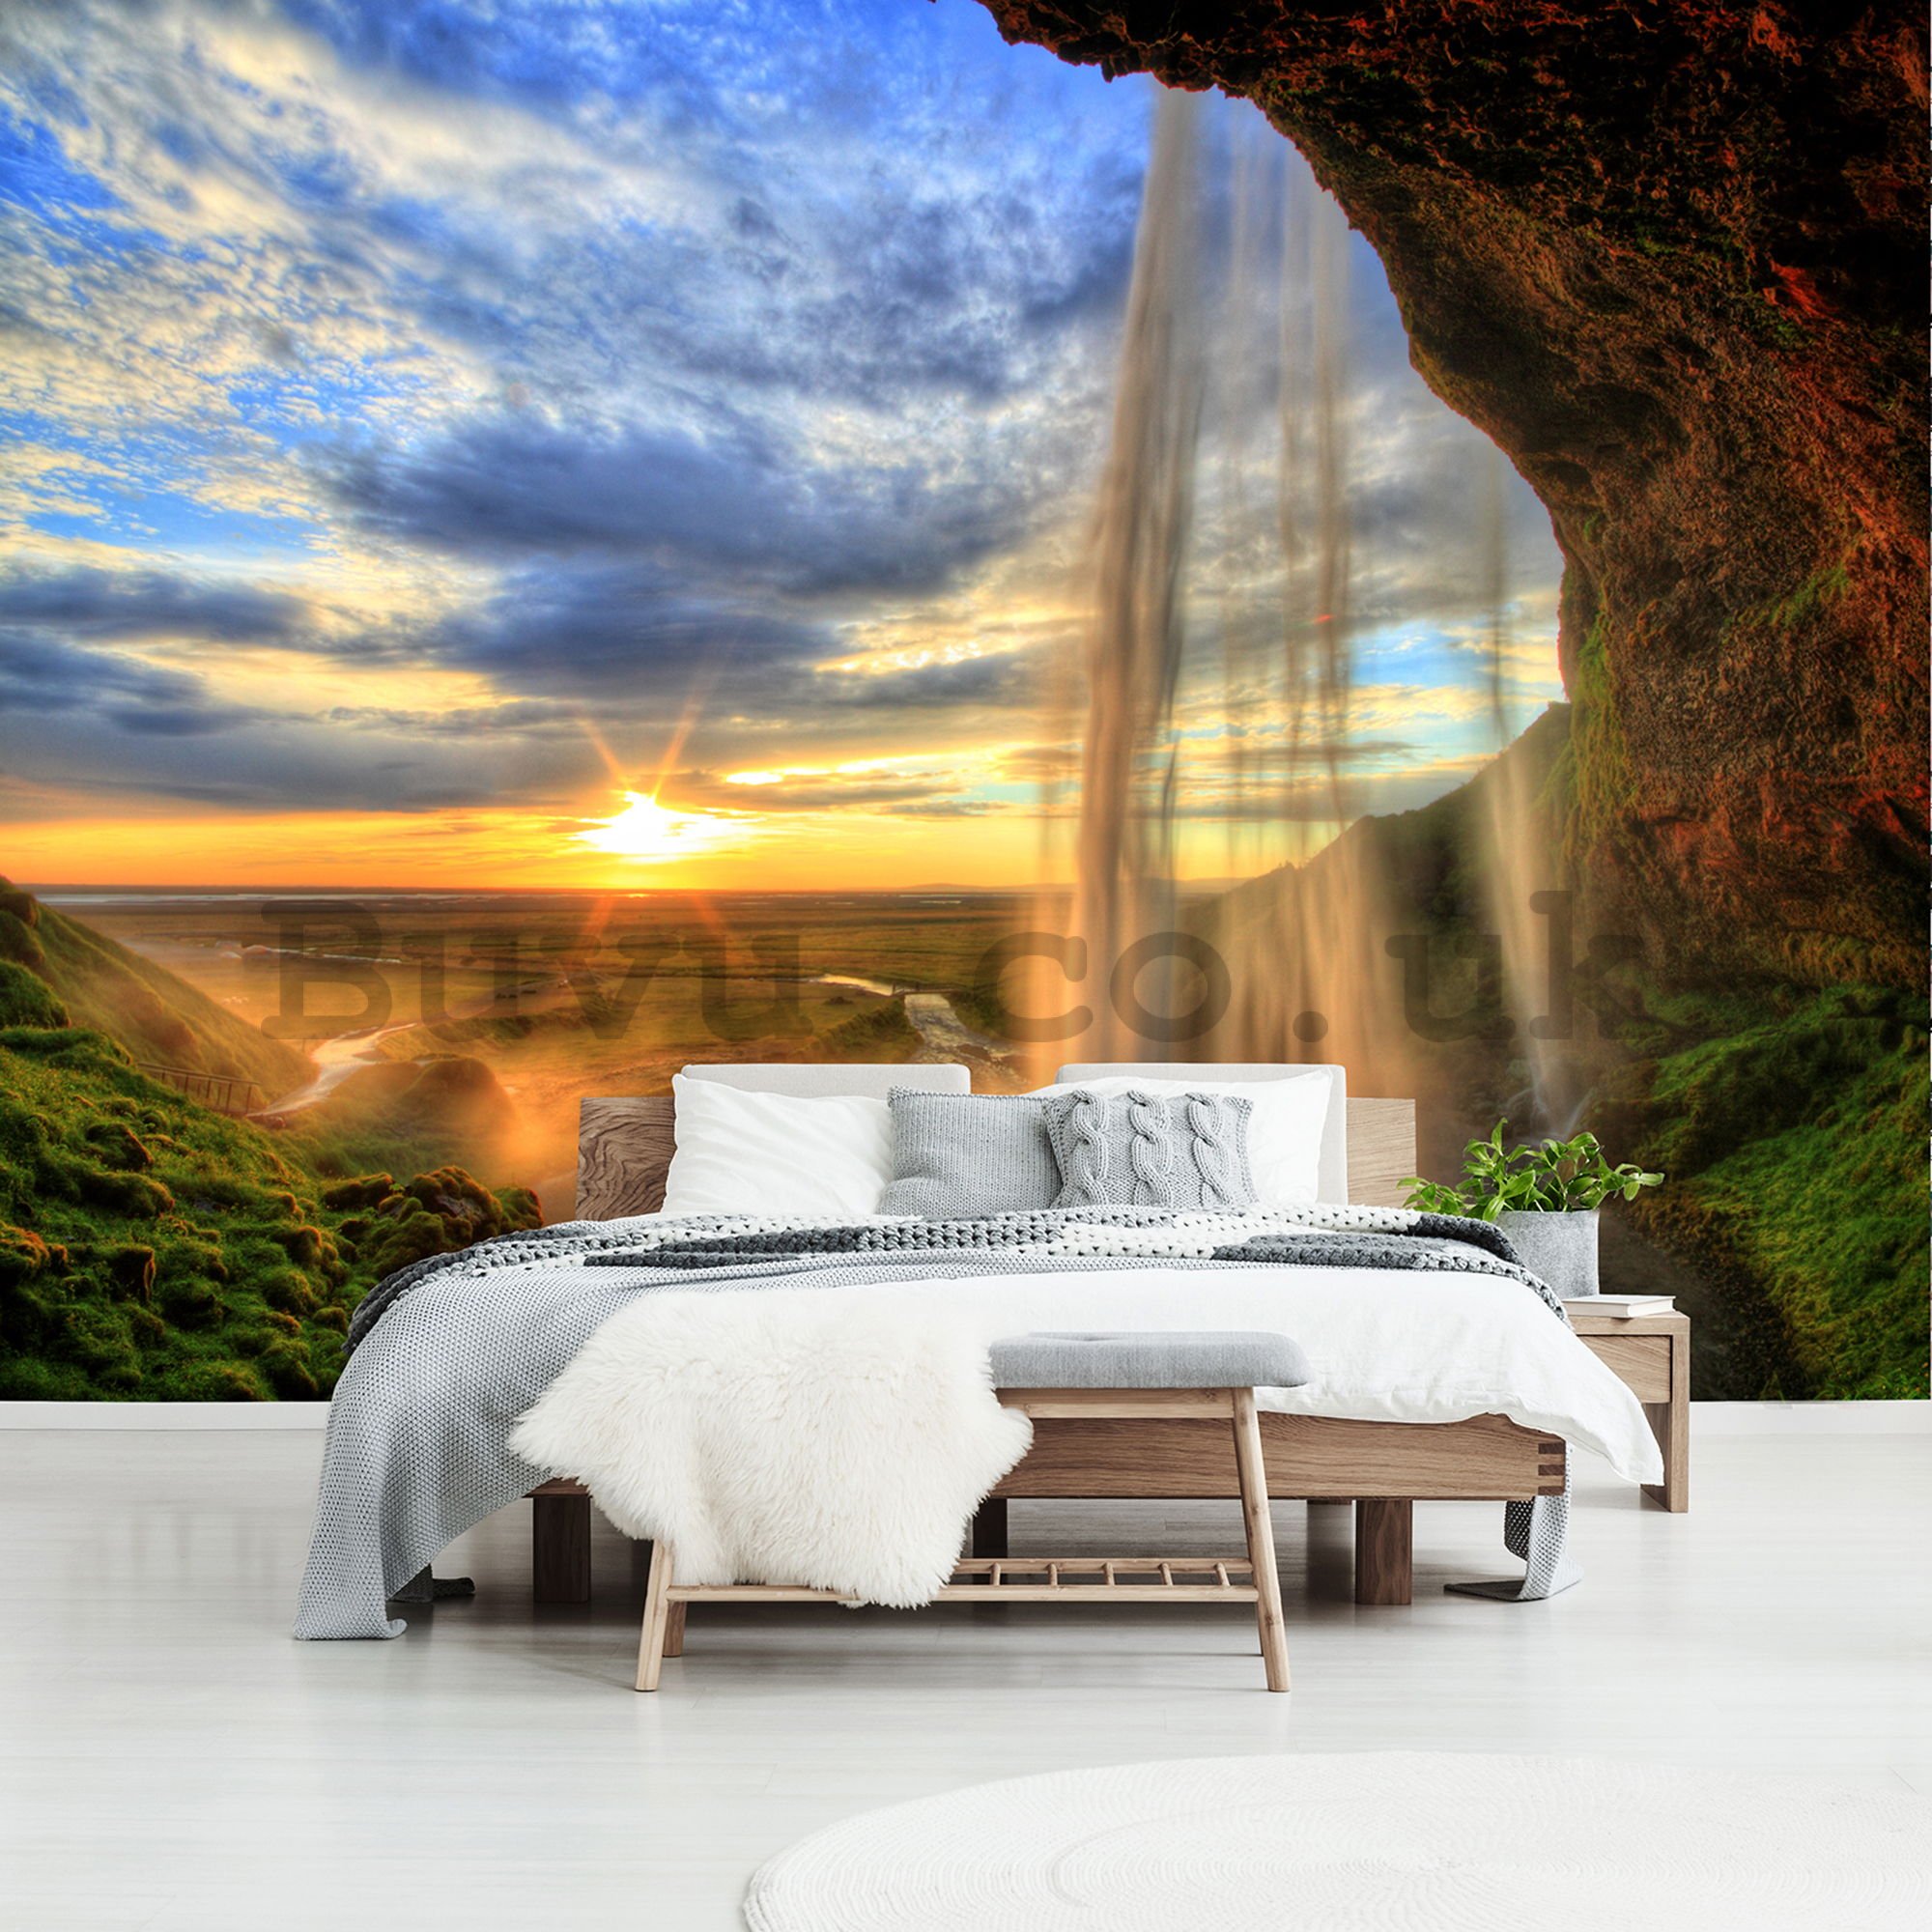 Wall mural: Waterfall at sunset - 184x254 cm